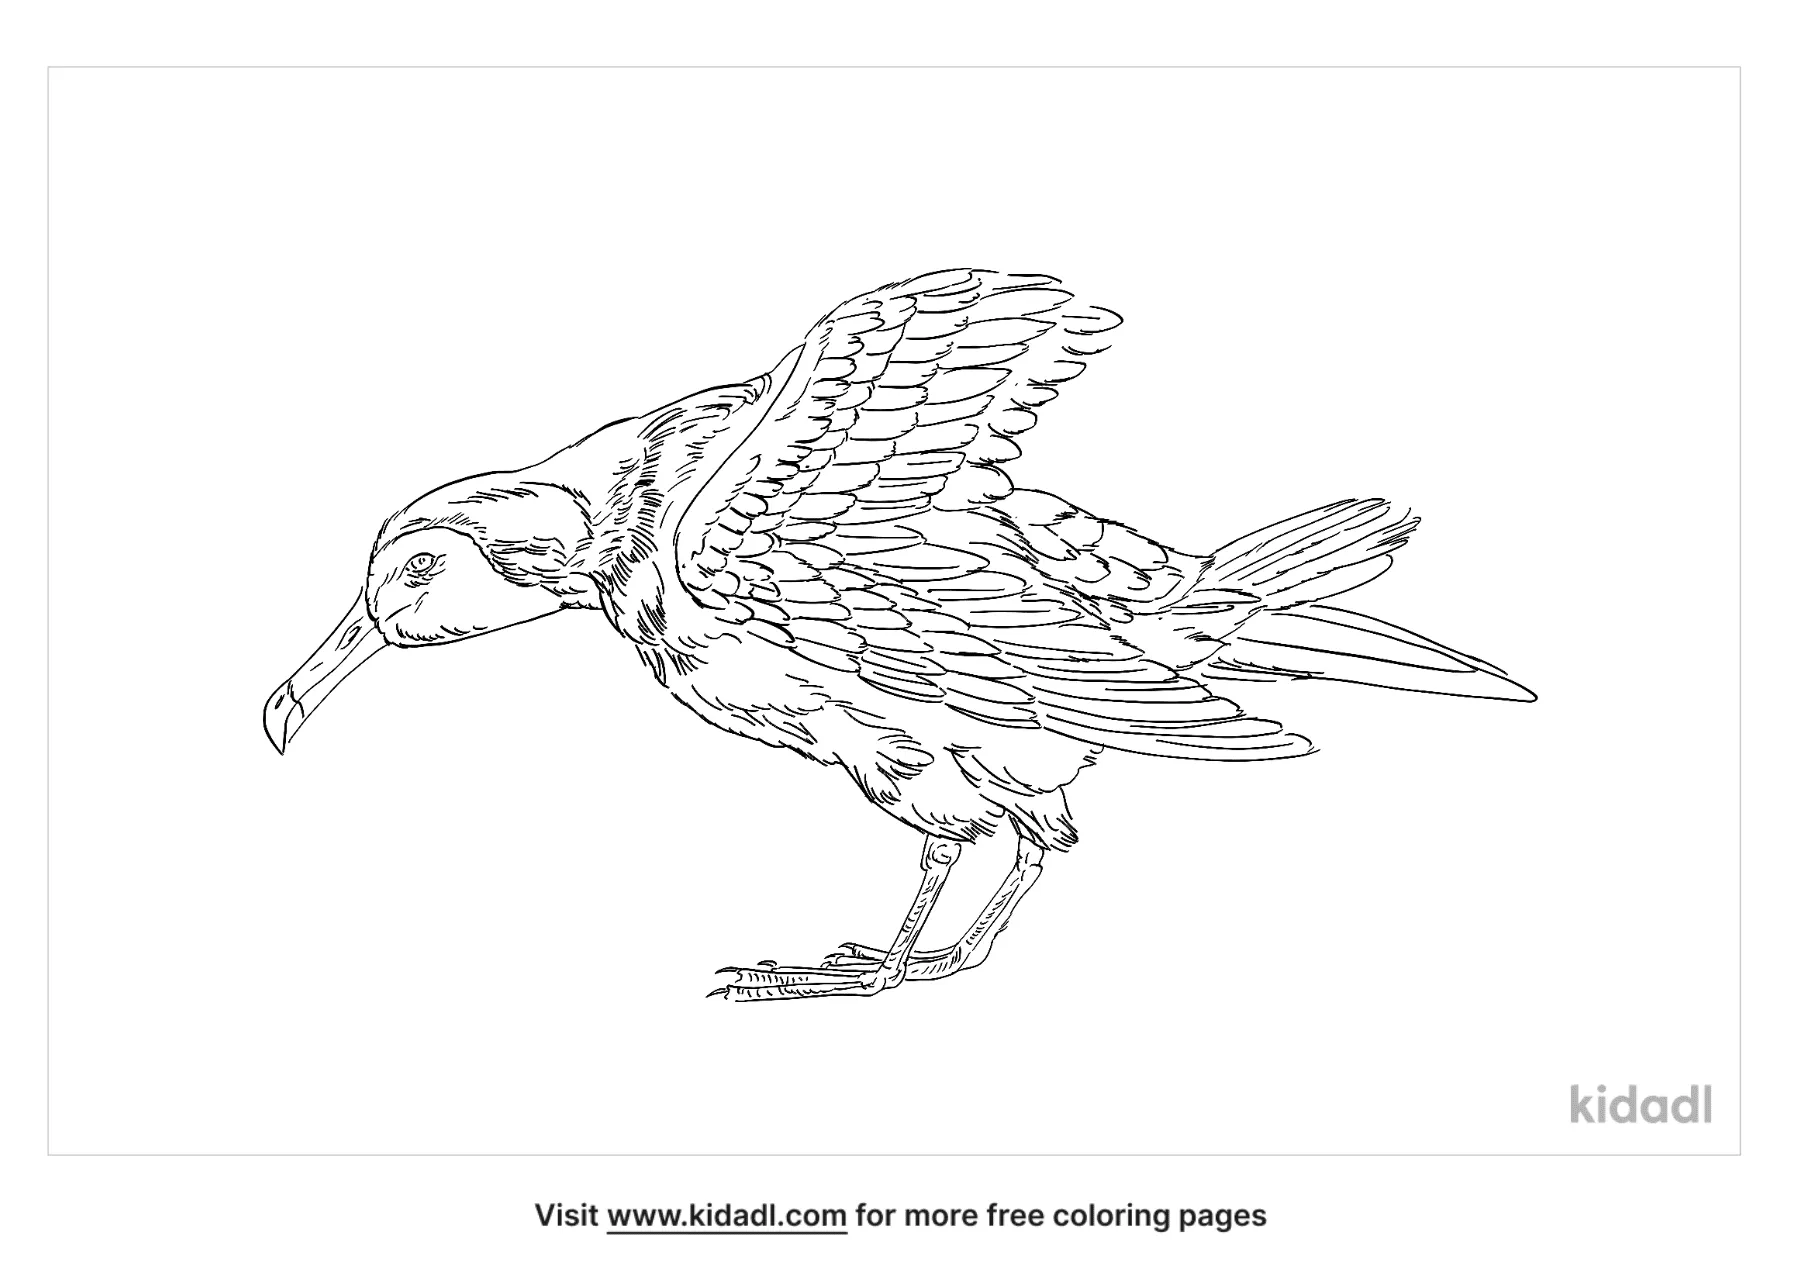 Amsterdam Albatross Coloring Page   Free Birds Coloring Page   Kidadl